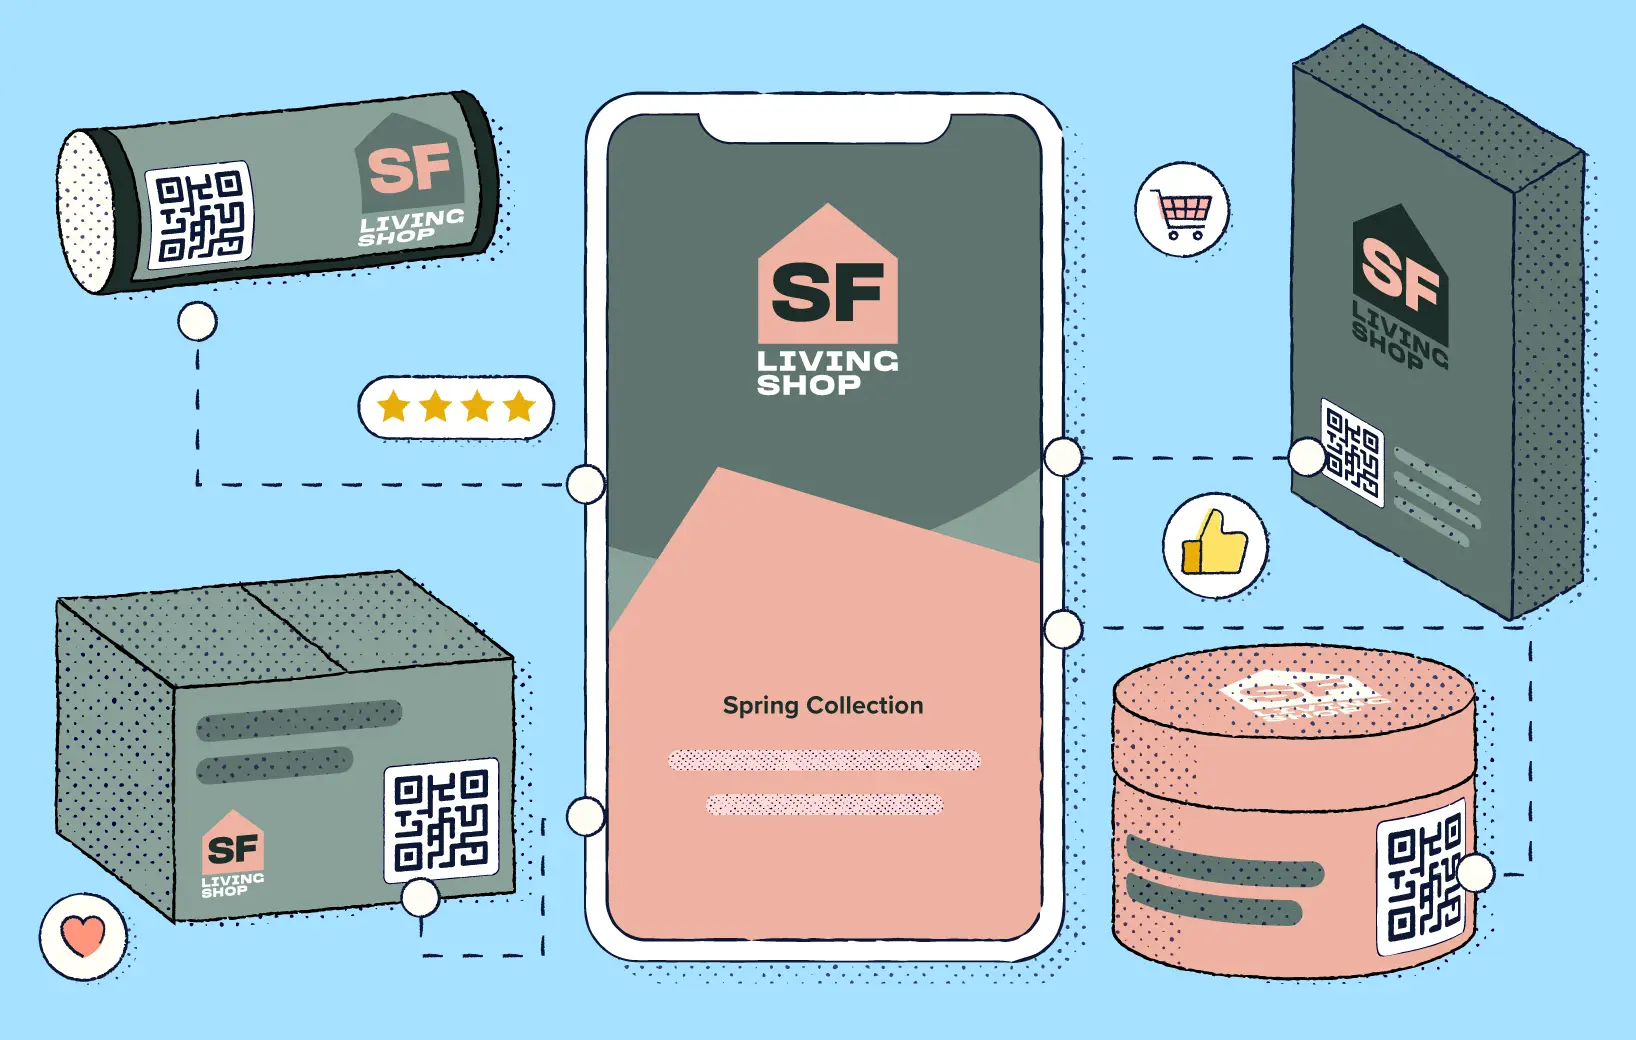 A smartphone displaying the fictional brand SF Living Shop surrounded by QR Codes on various product packaging.